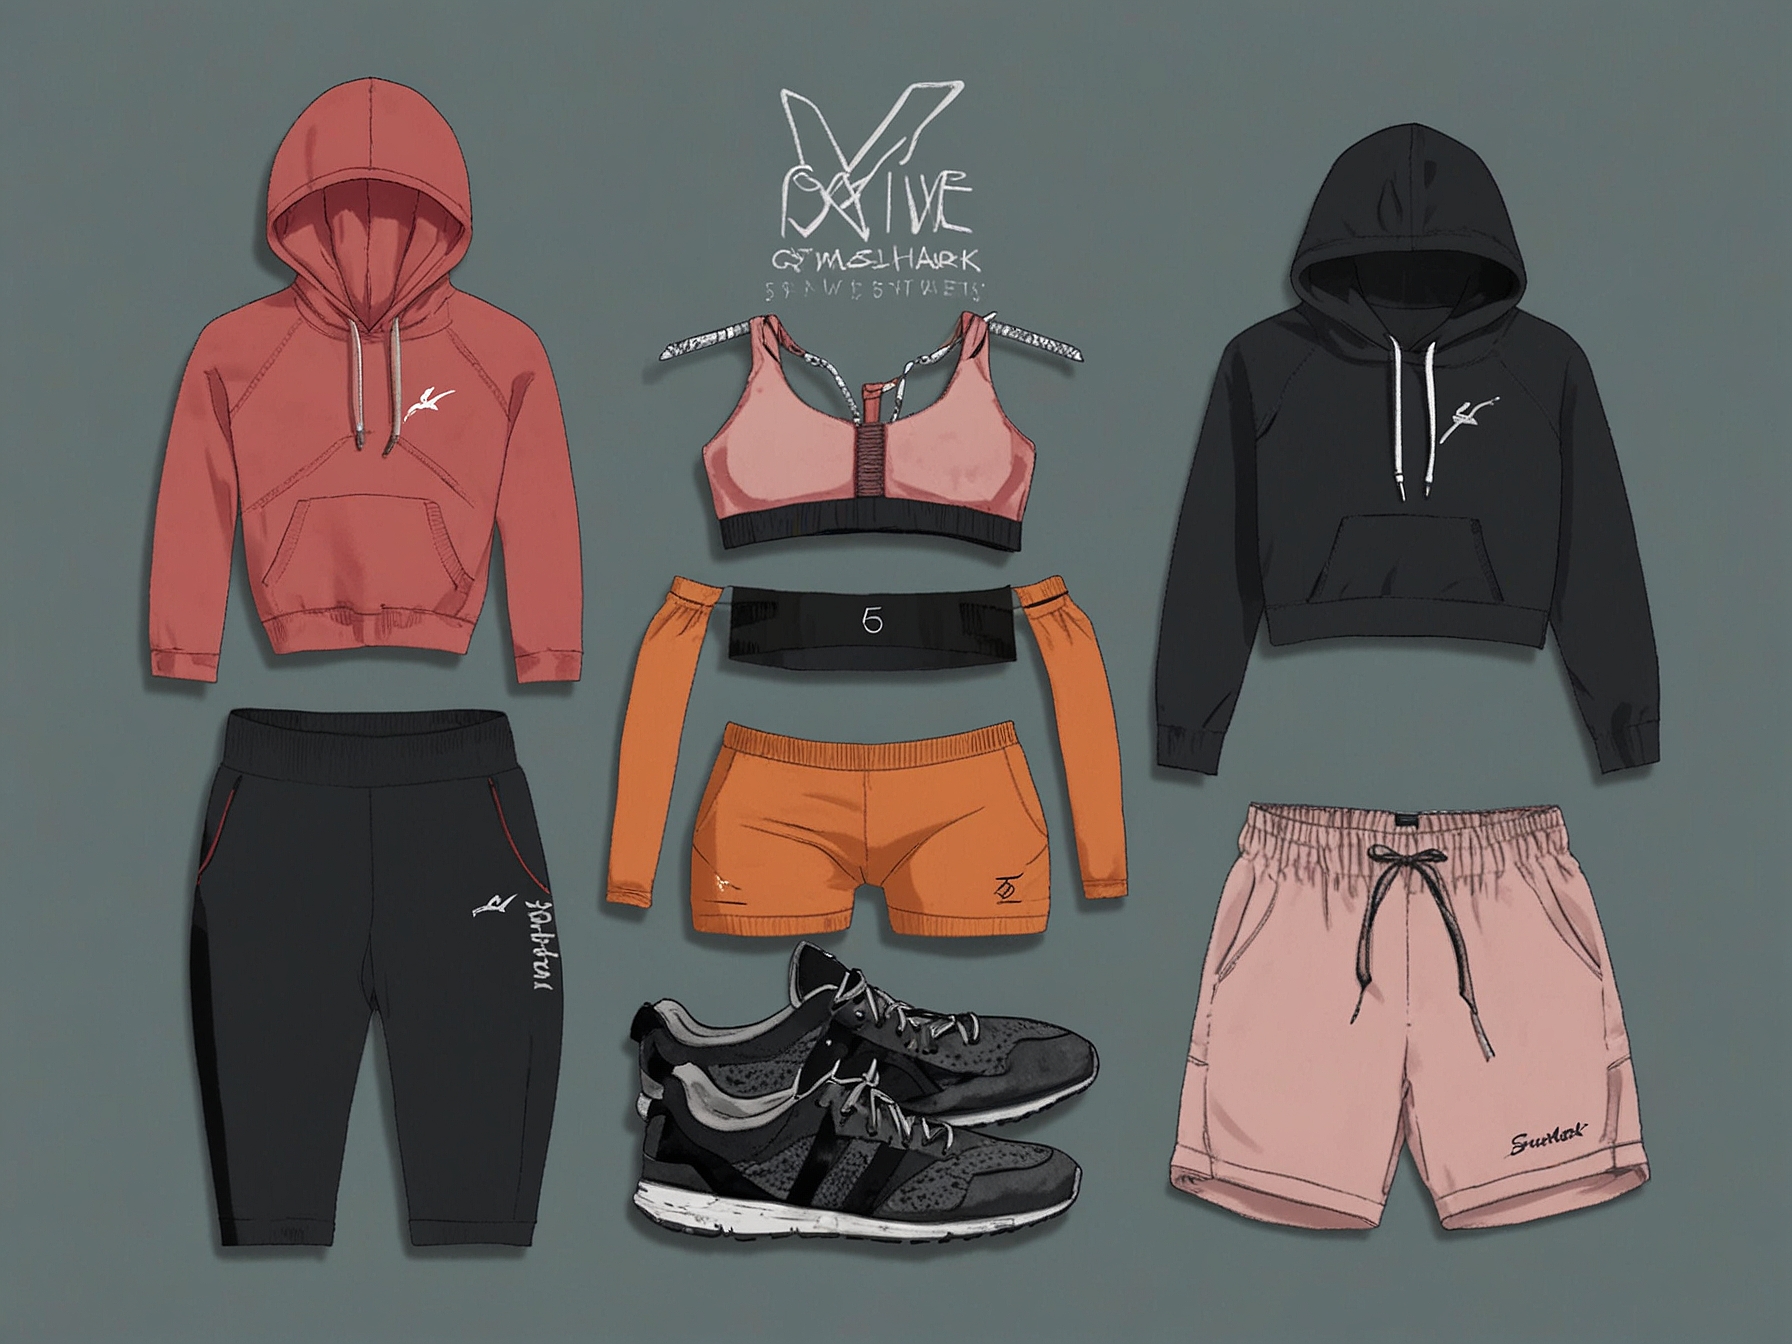 A collection of the top five discounted Gymshark fitness apparel items, including leggings, hoodies, shorts, tank tops, and sports bras, all displayed together in a stylish arrangement.